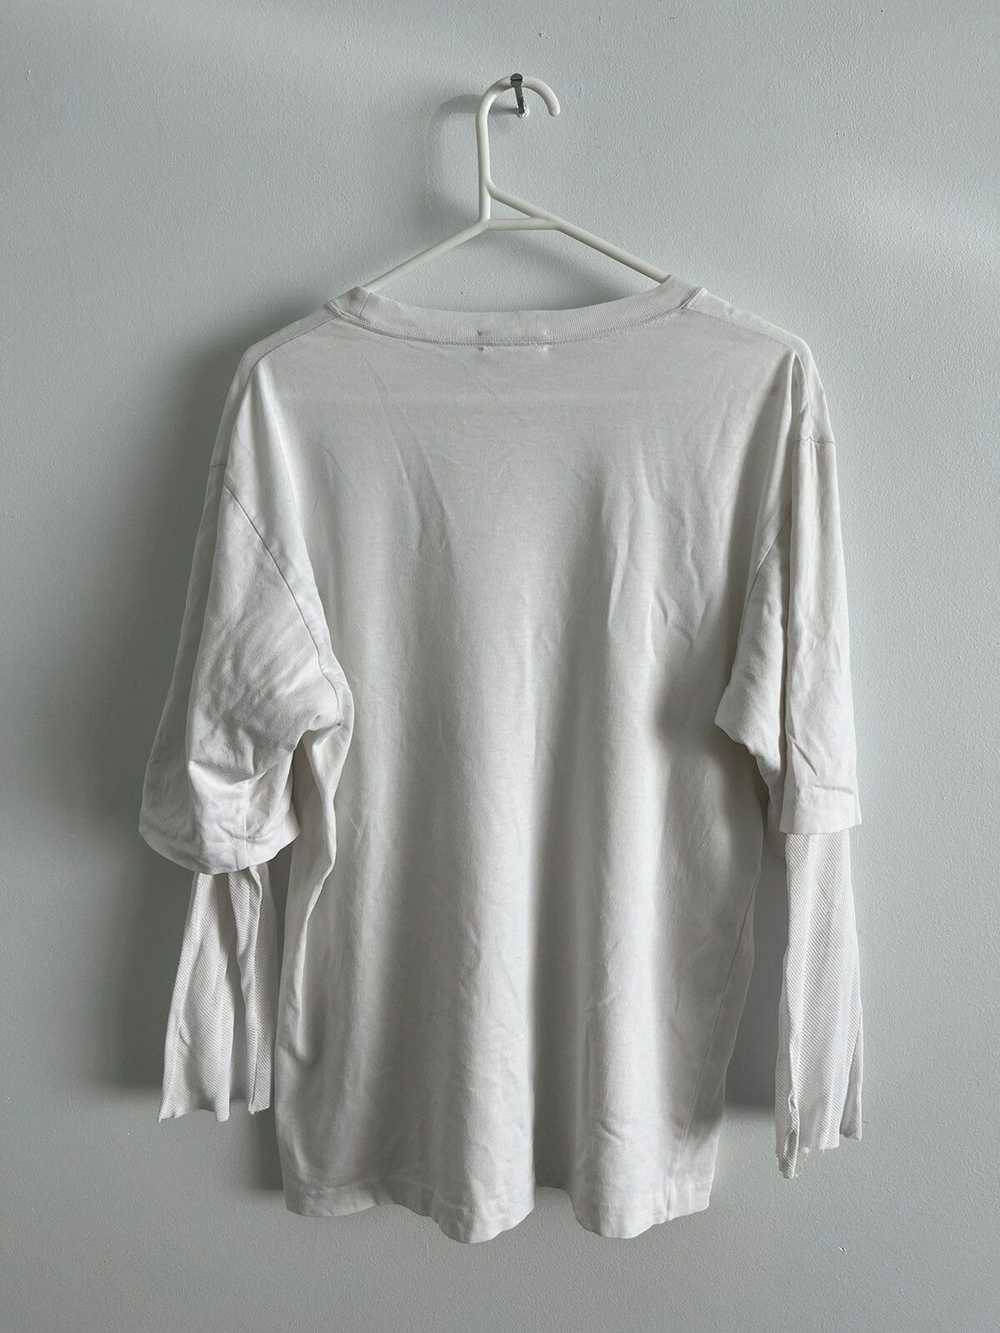 Undercover Undercover SS13 double layered tshirt - image 2